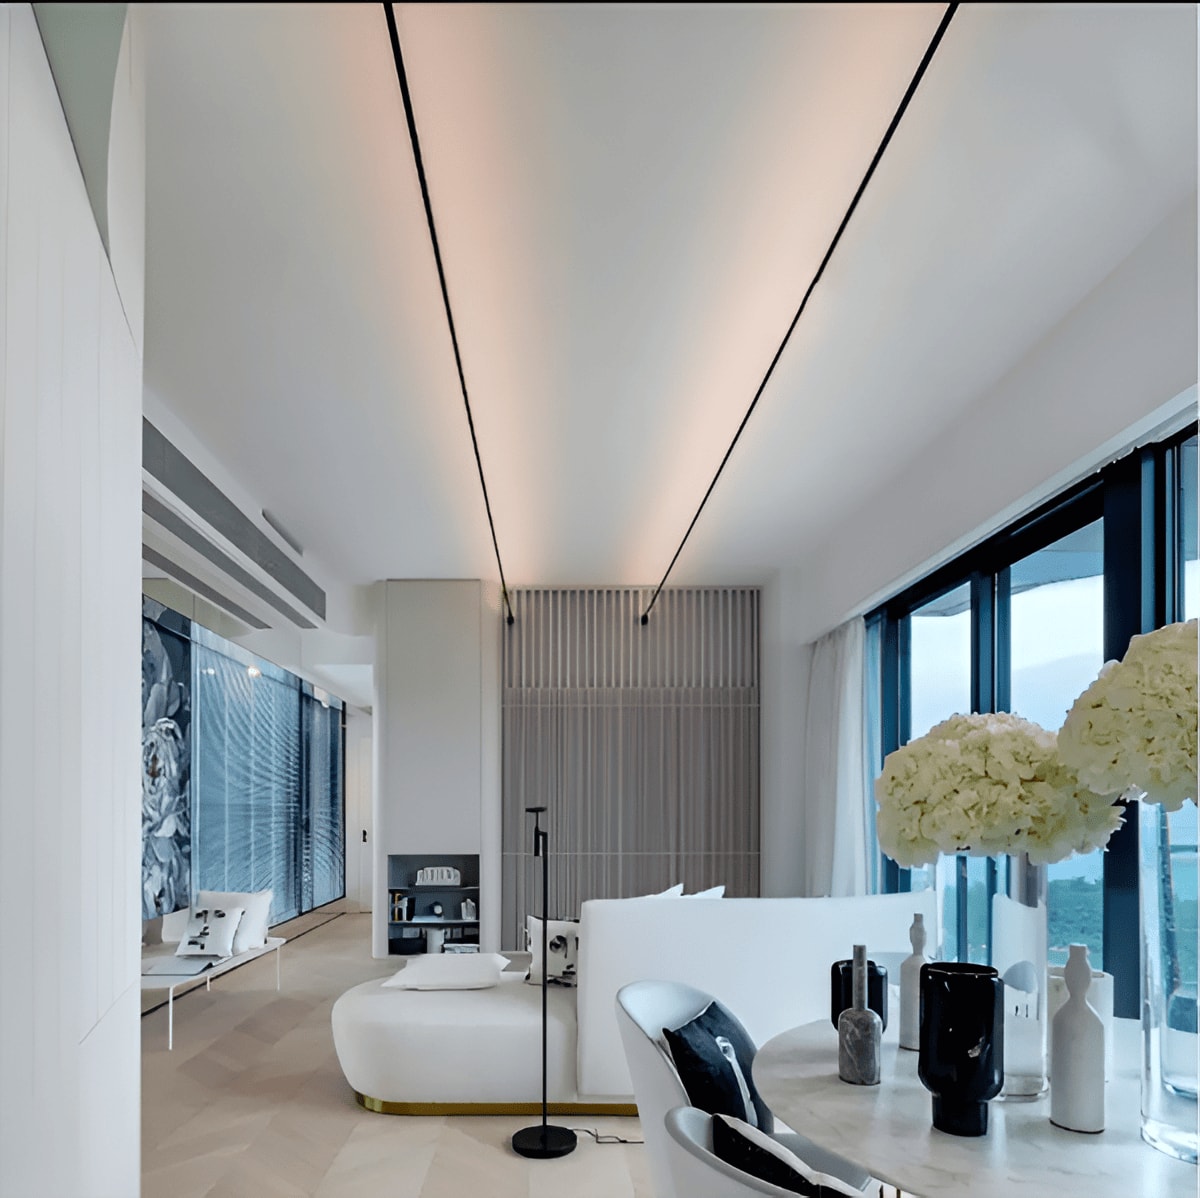 Skyline LED Channel running wall to wall uplighting a modern lounge ceiling